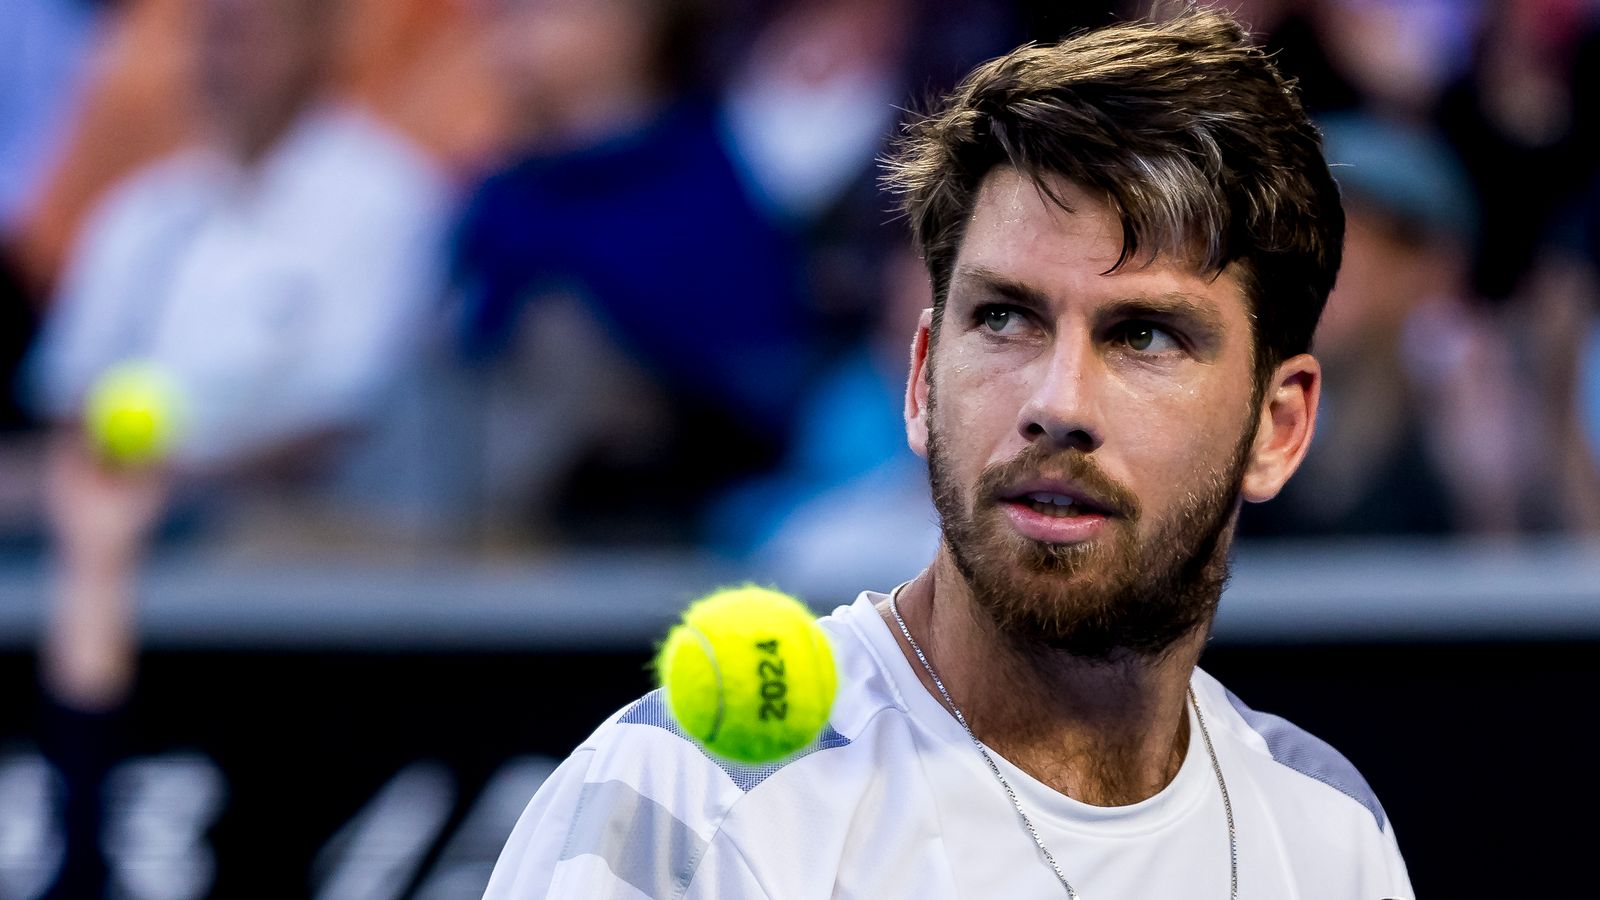 Argentina Open: Cameron Norrie out of world top 20 after defeat as Jannik Sinner continues winning run in Rotterdam